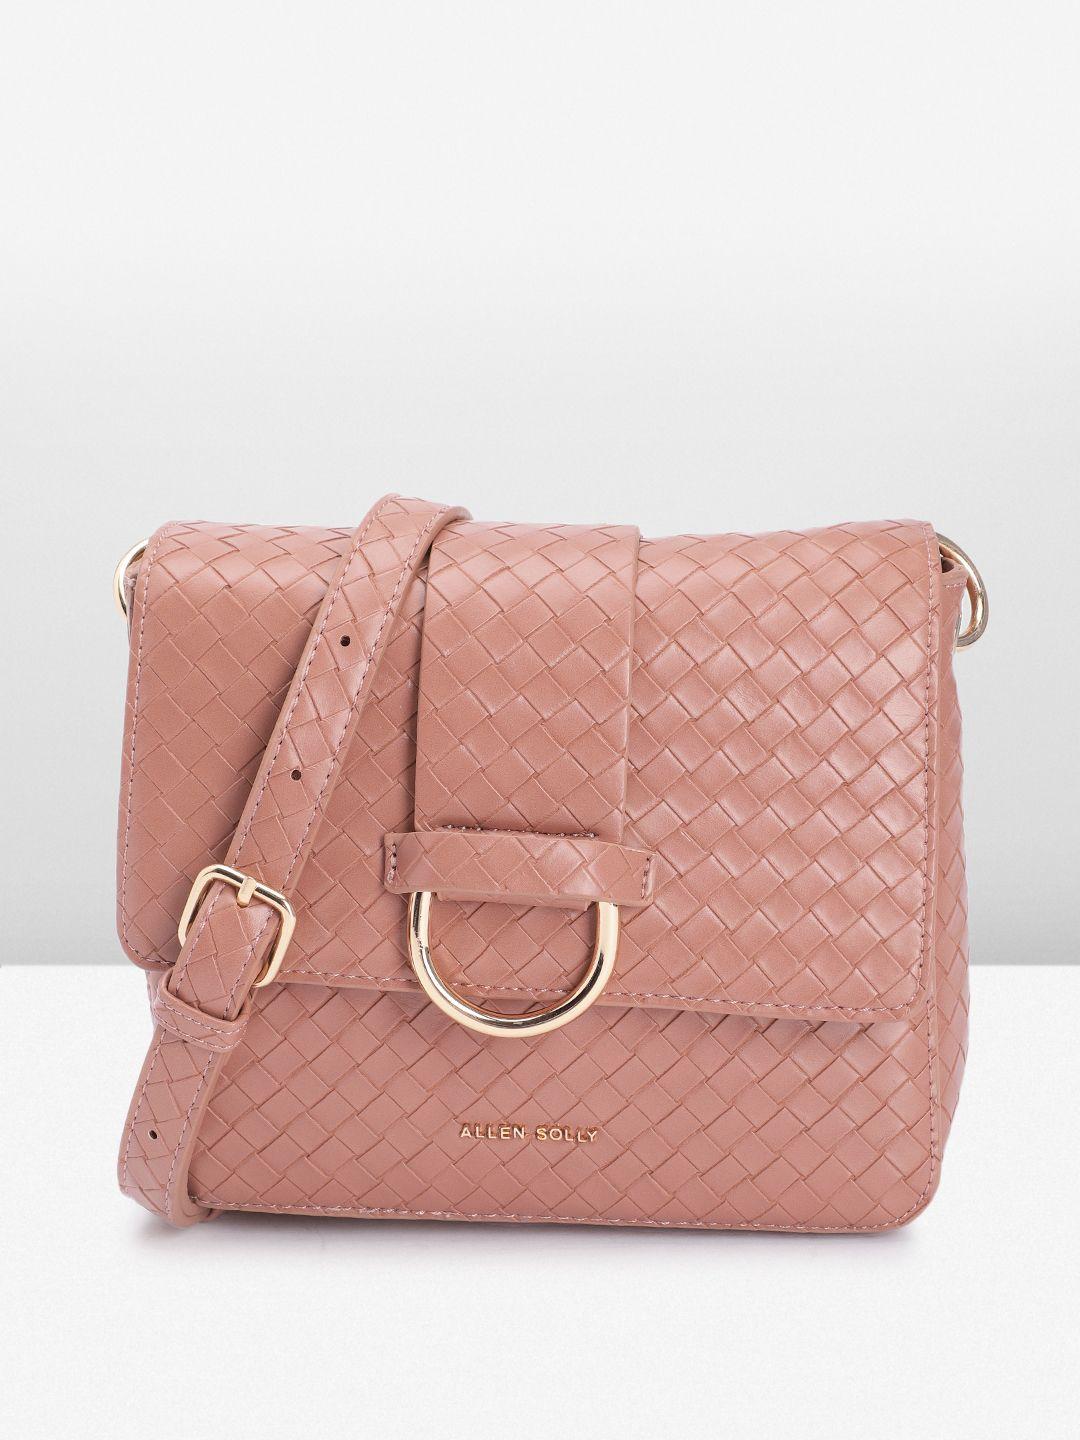 allen solly textured structured sling bag